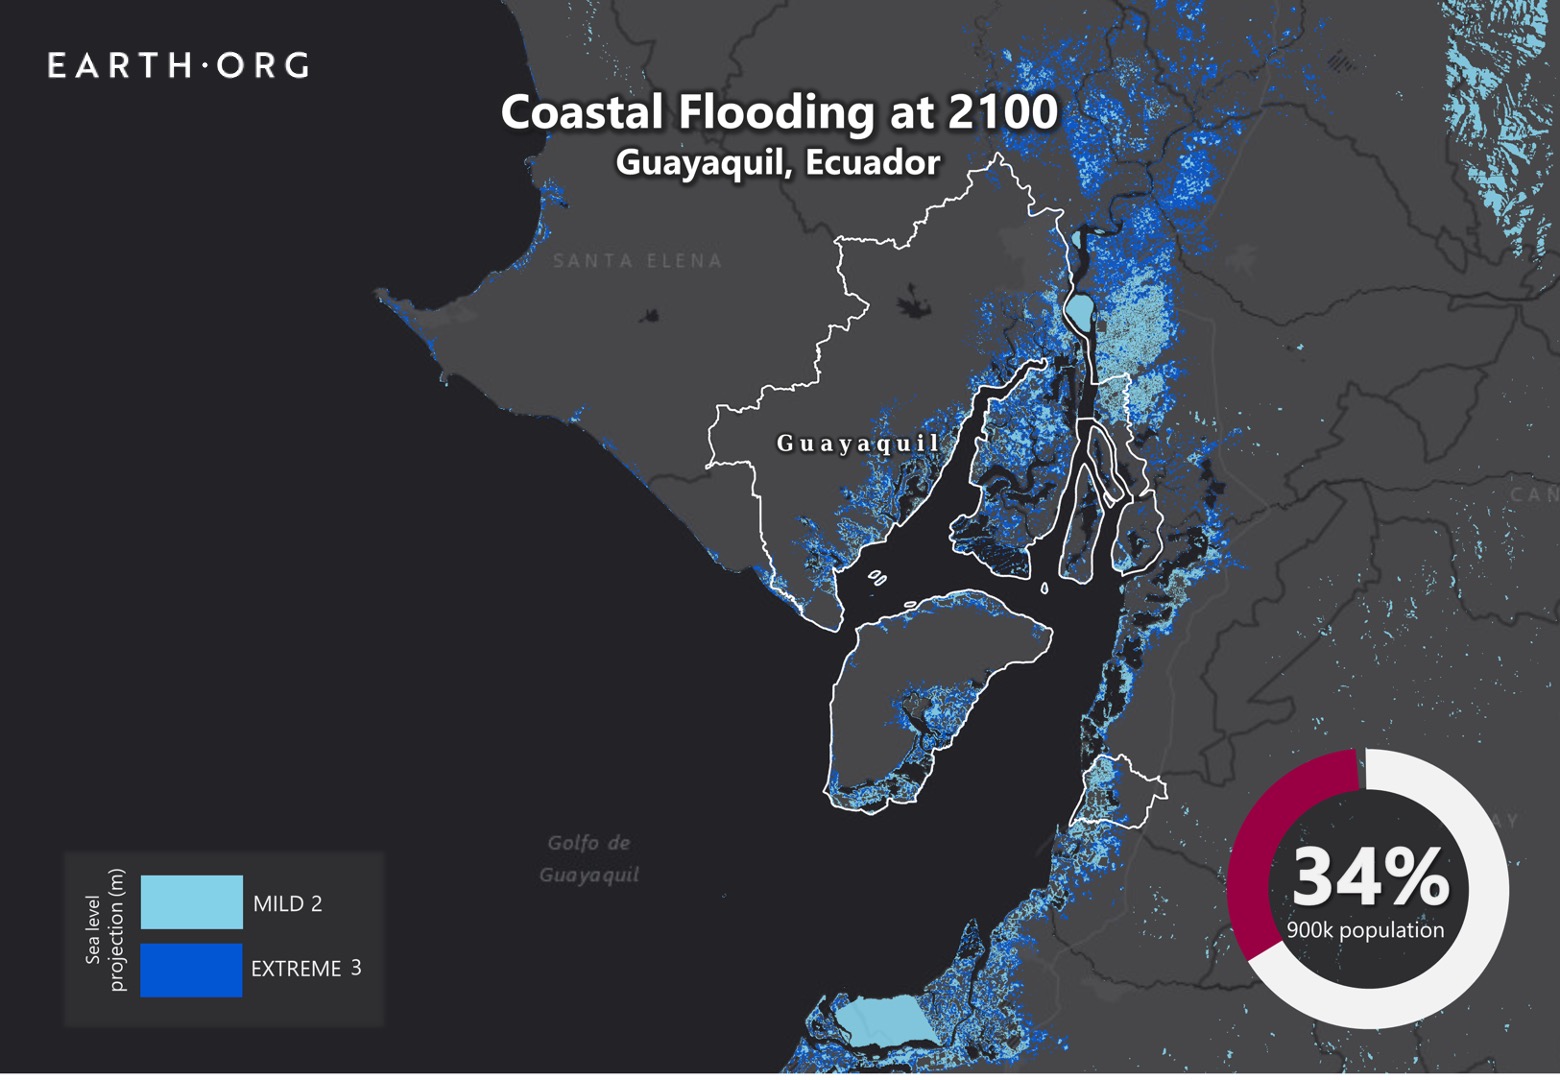 Sea Level Rise by 2100 - Guayaquil | Earth.Org - Past | Present | Future